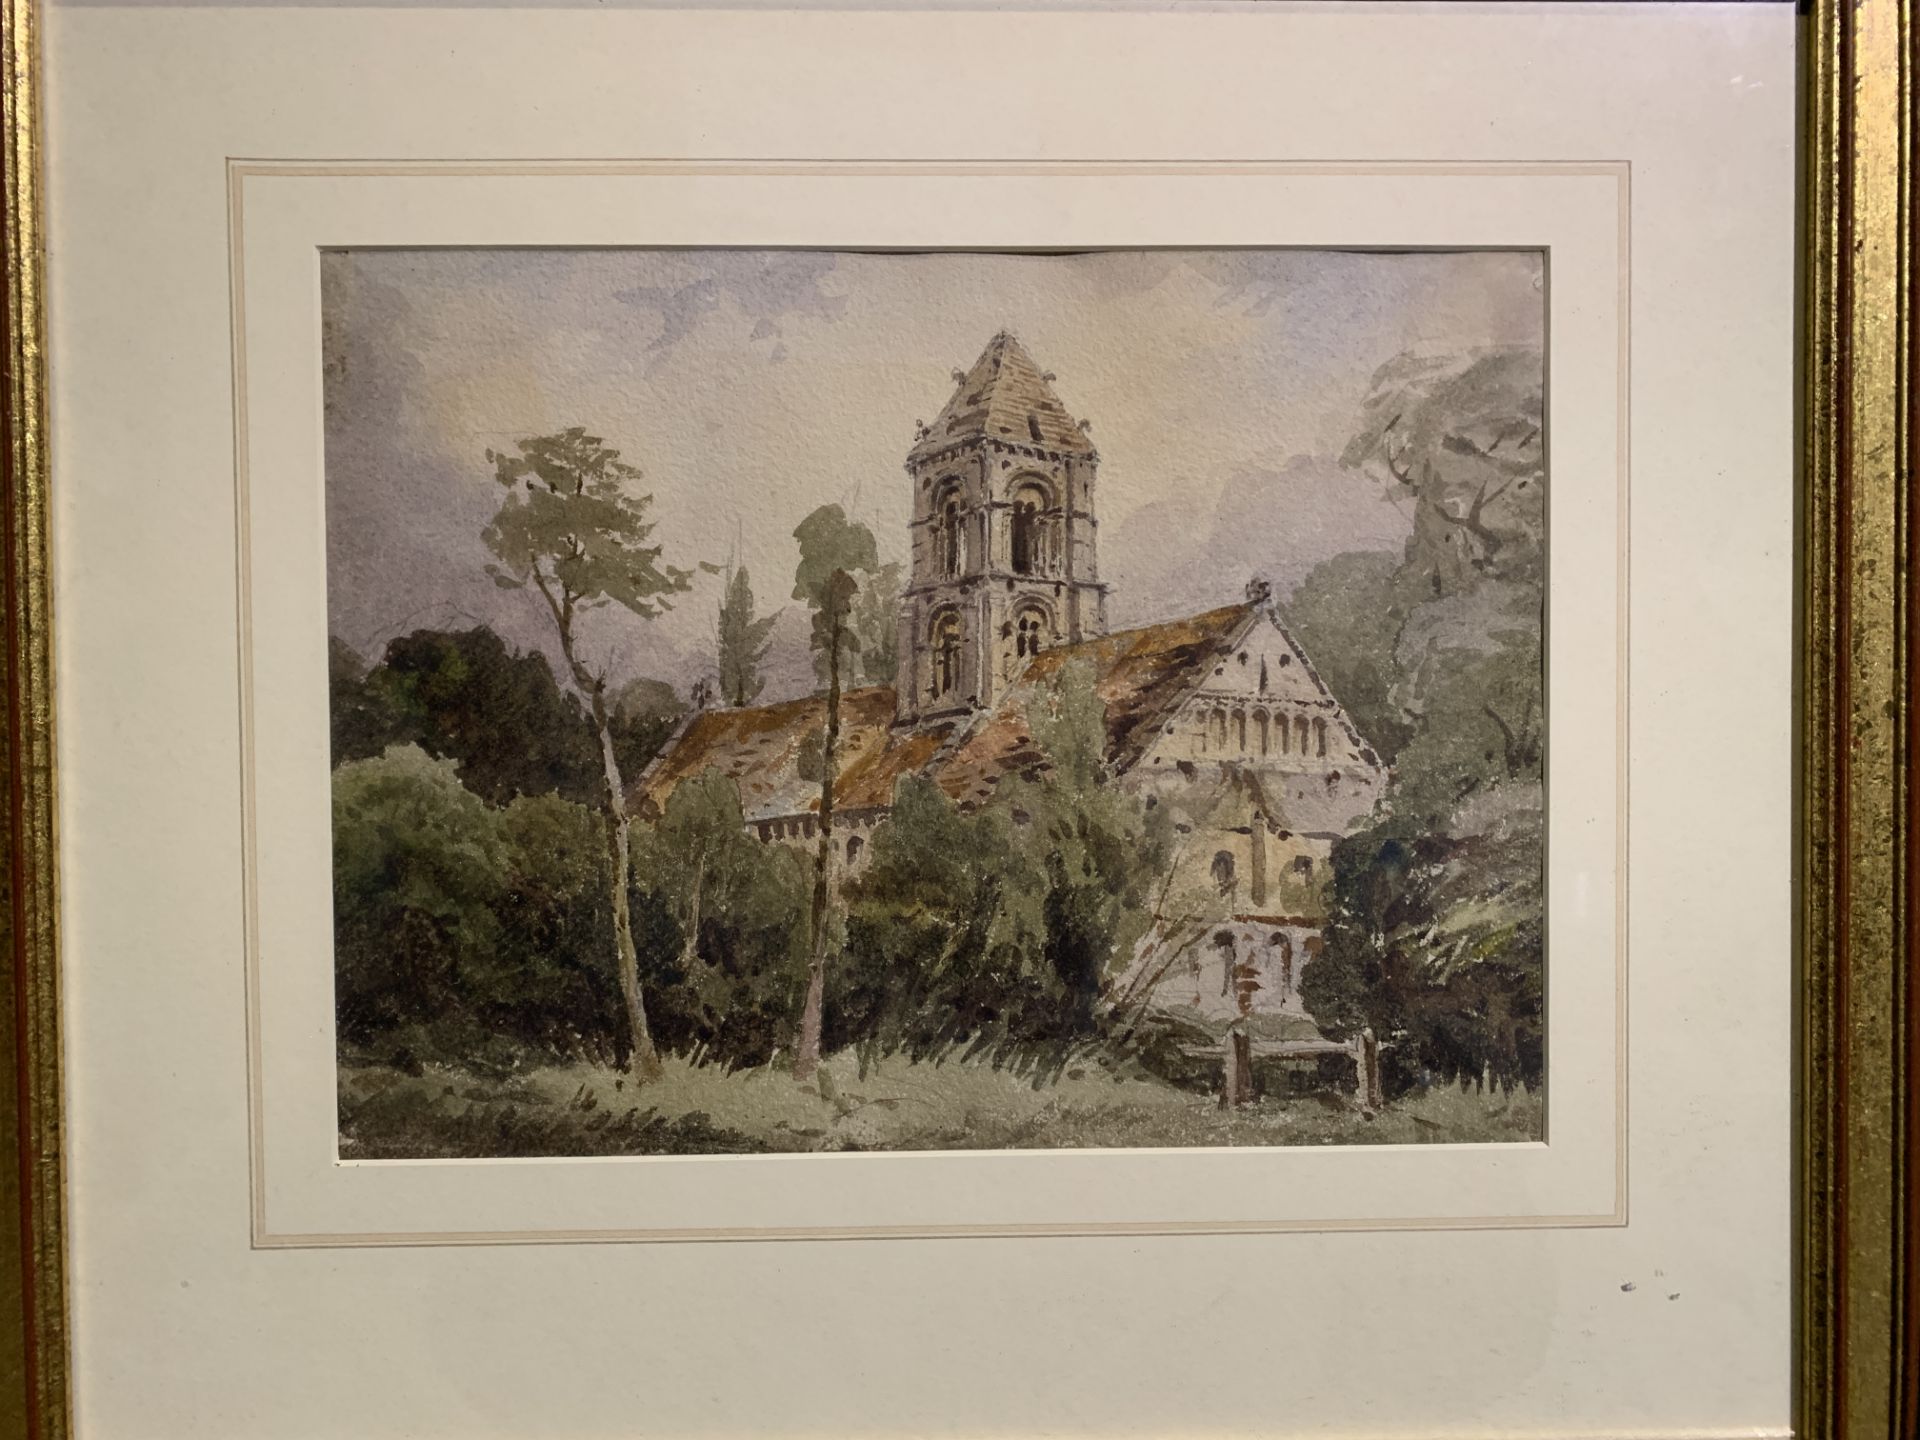 Framed and glazed watercolour "Romanesque Abbey in France" by John Louis Petit - Image 3 of 3